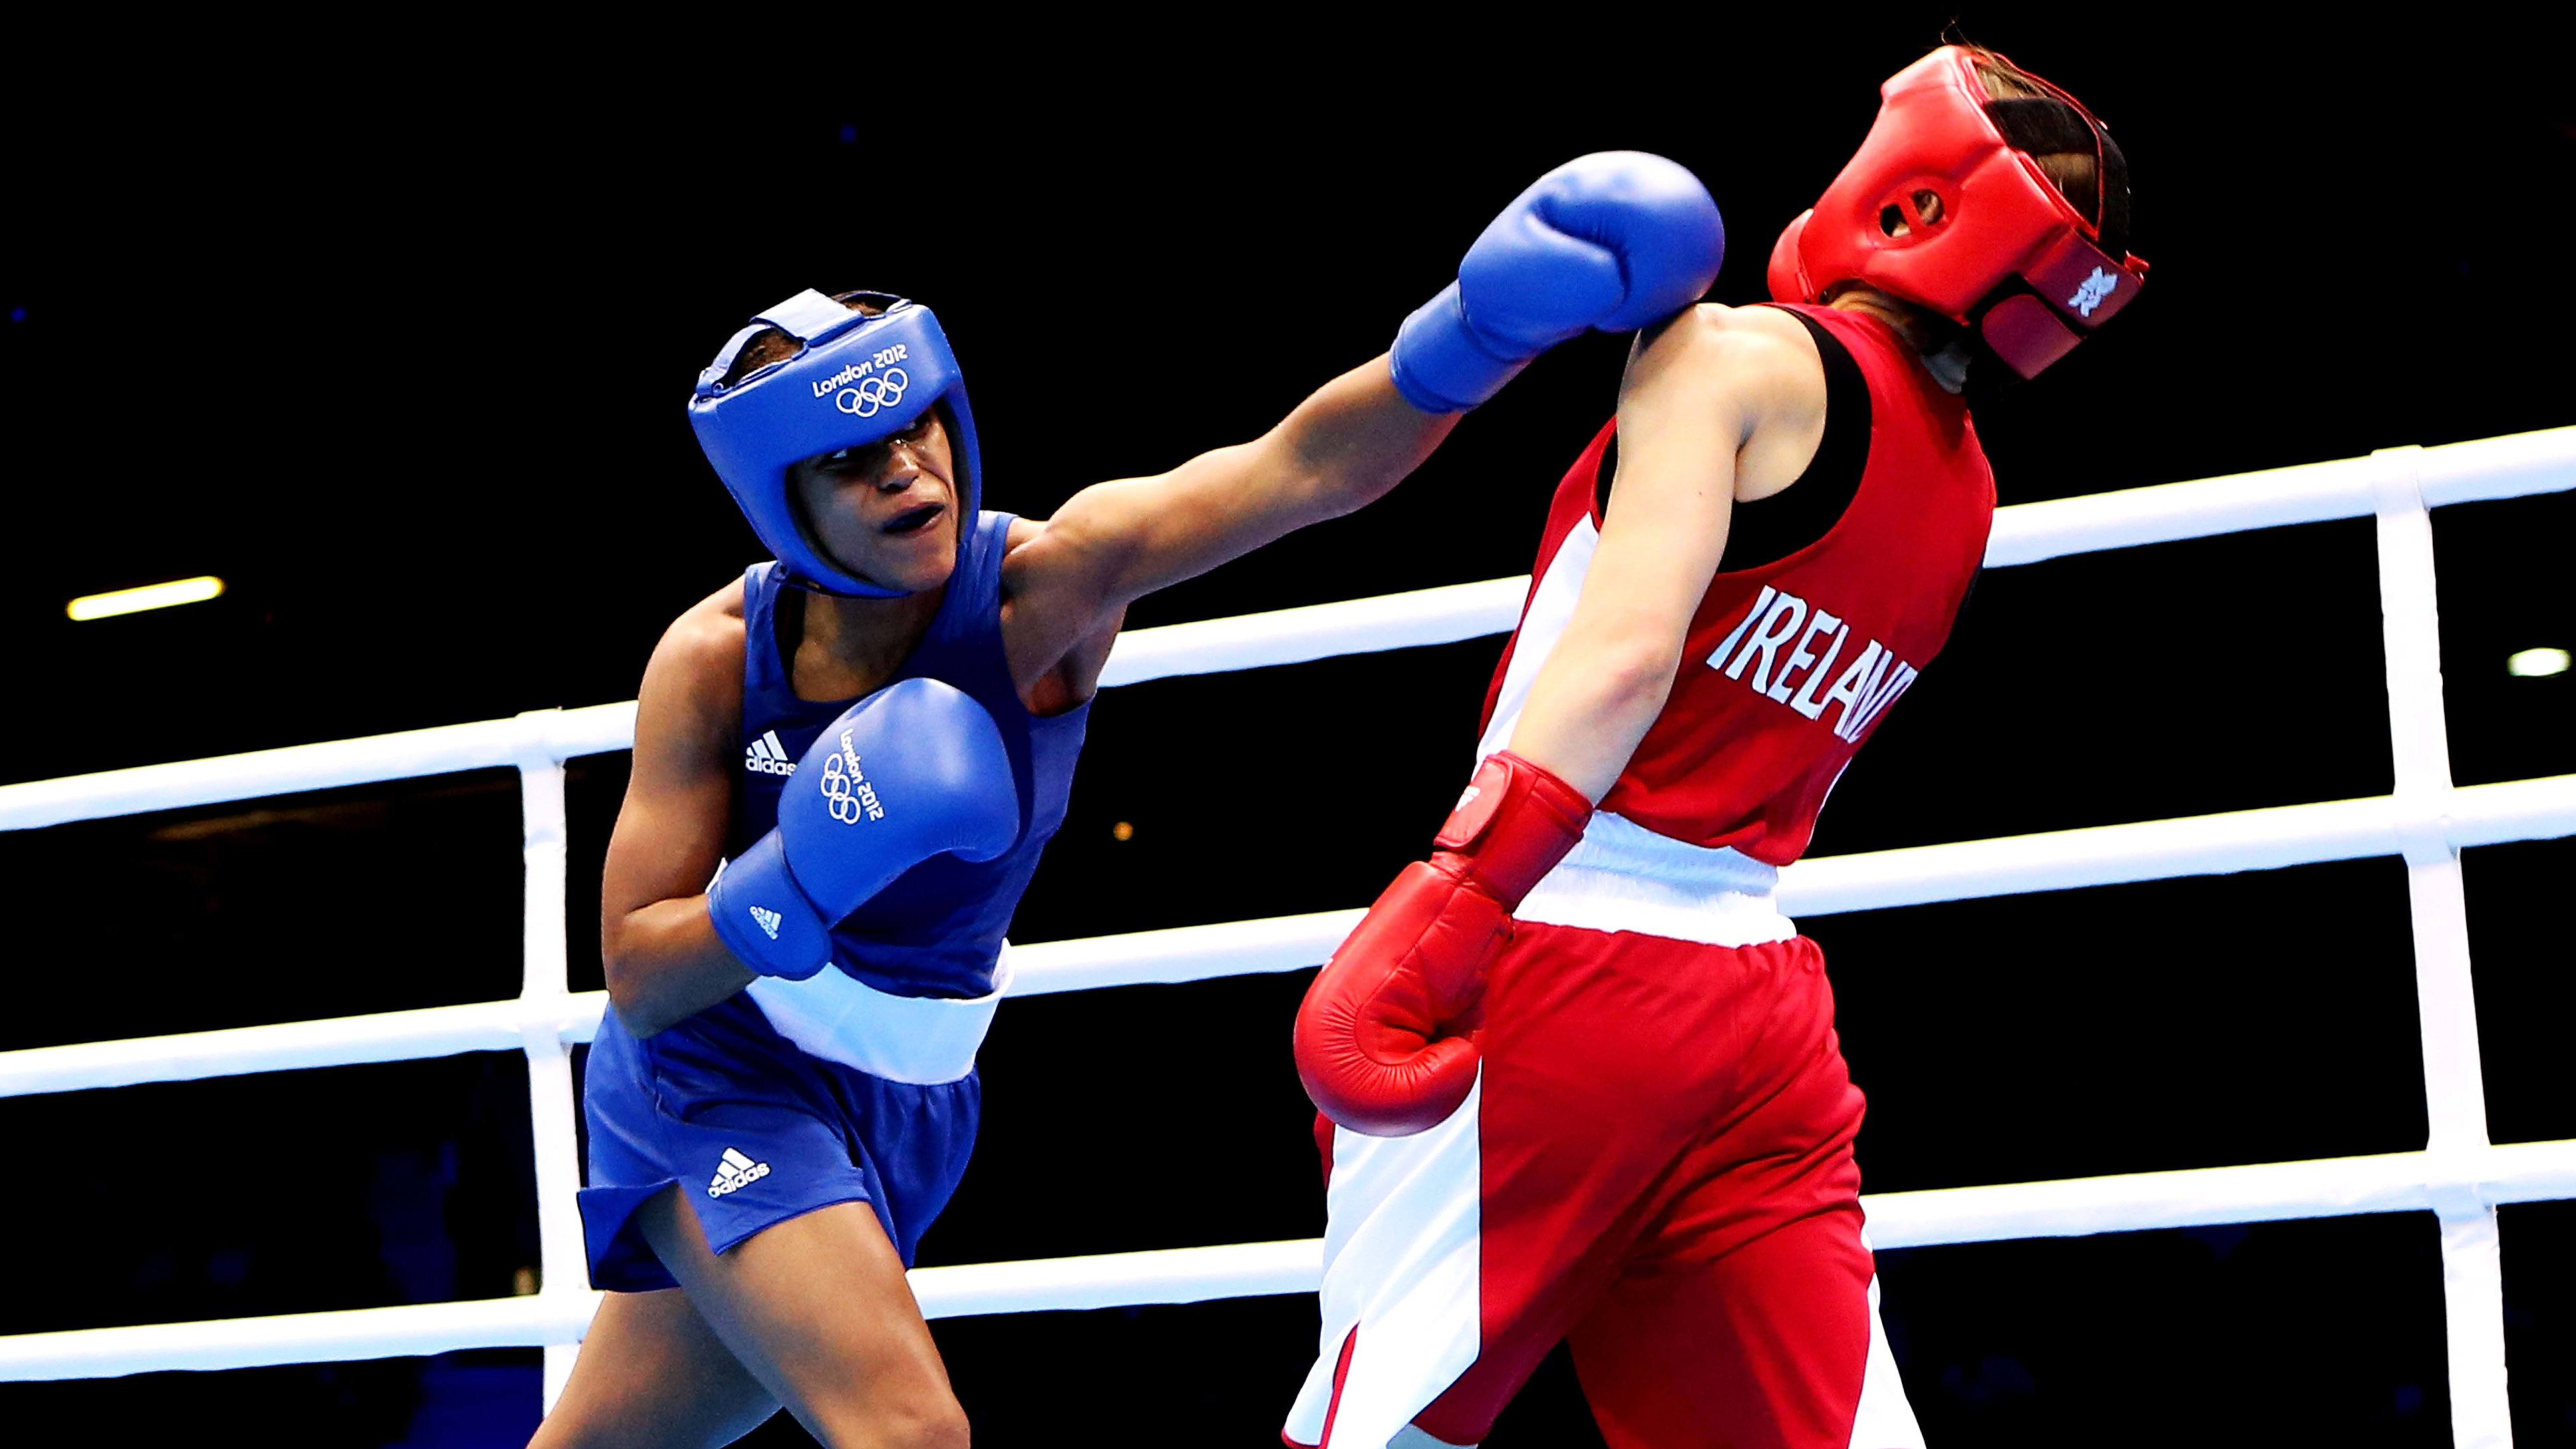 Cuba's female boxers dream of Olympic glory after ban lifted